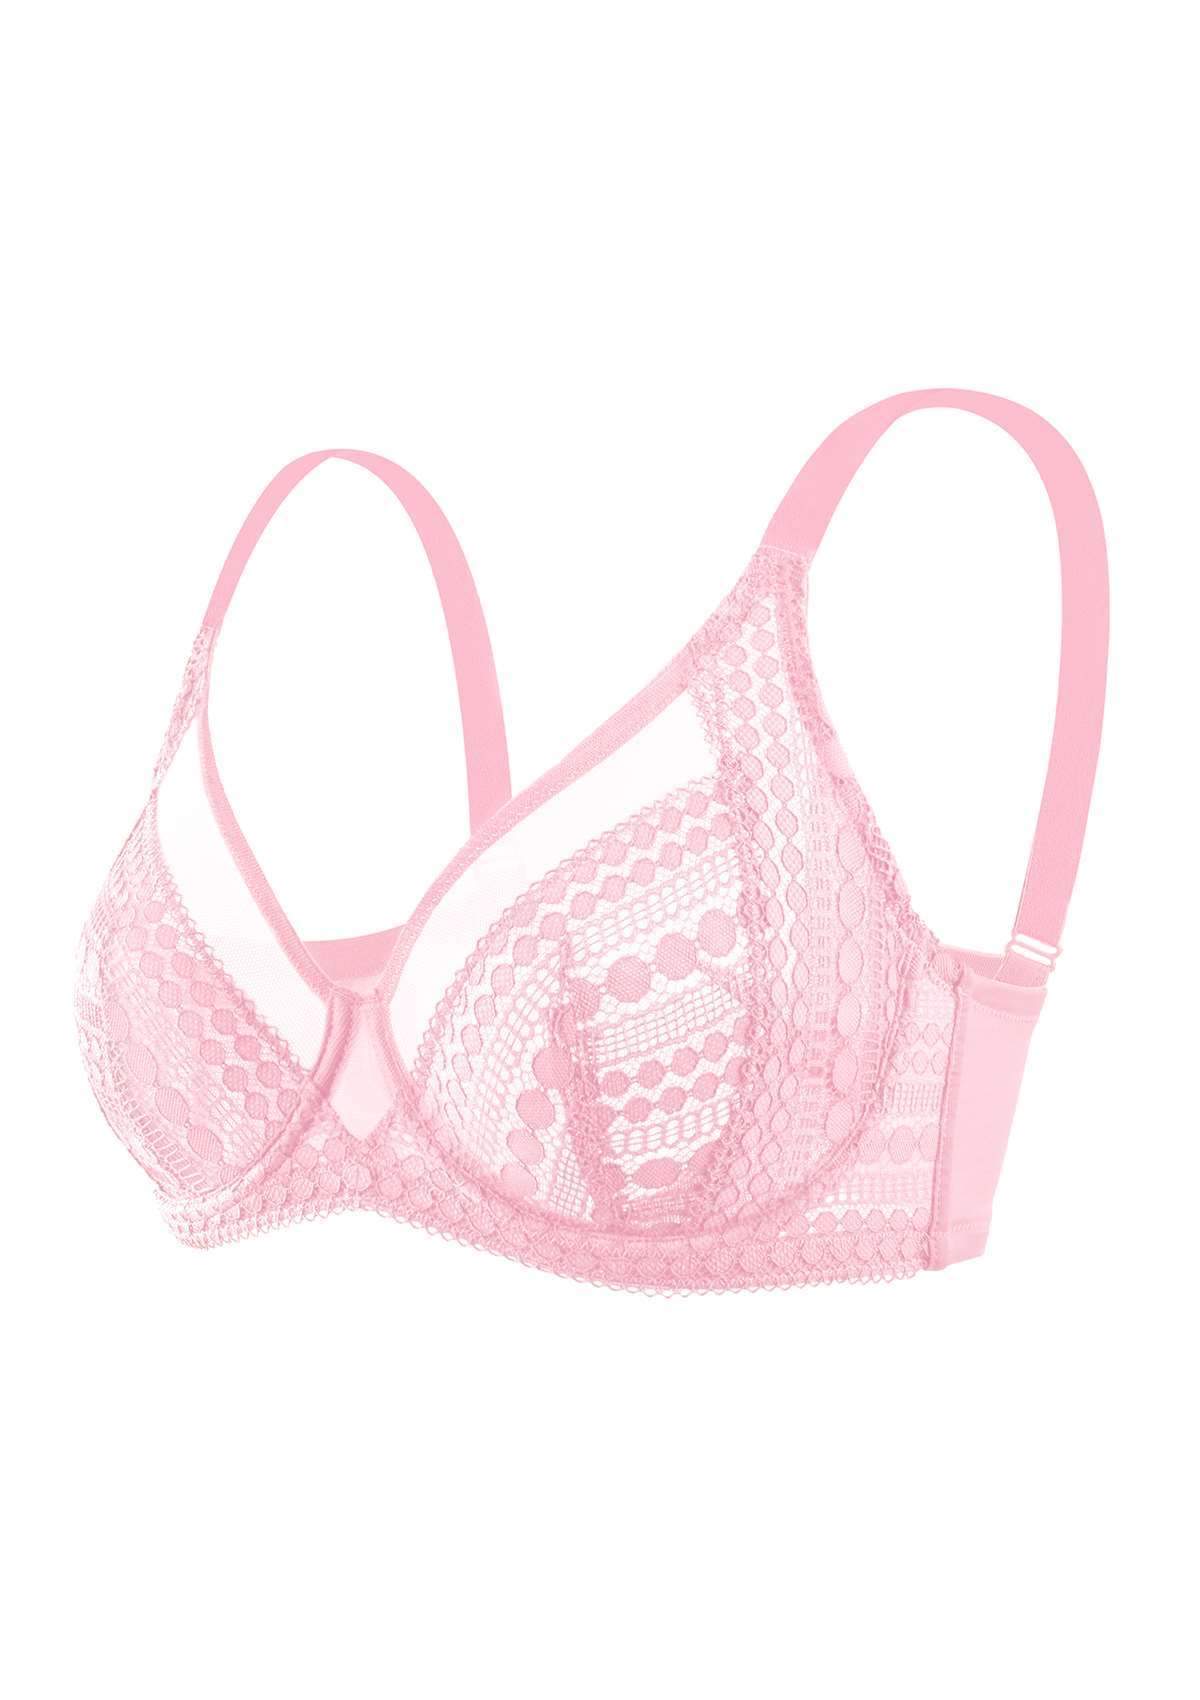 HSIA Heroine Lace Bra And Panties Set: Most Comfortable Supportive Bra - Pink / 42 / D